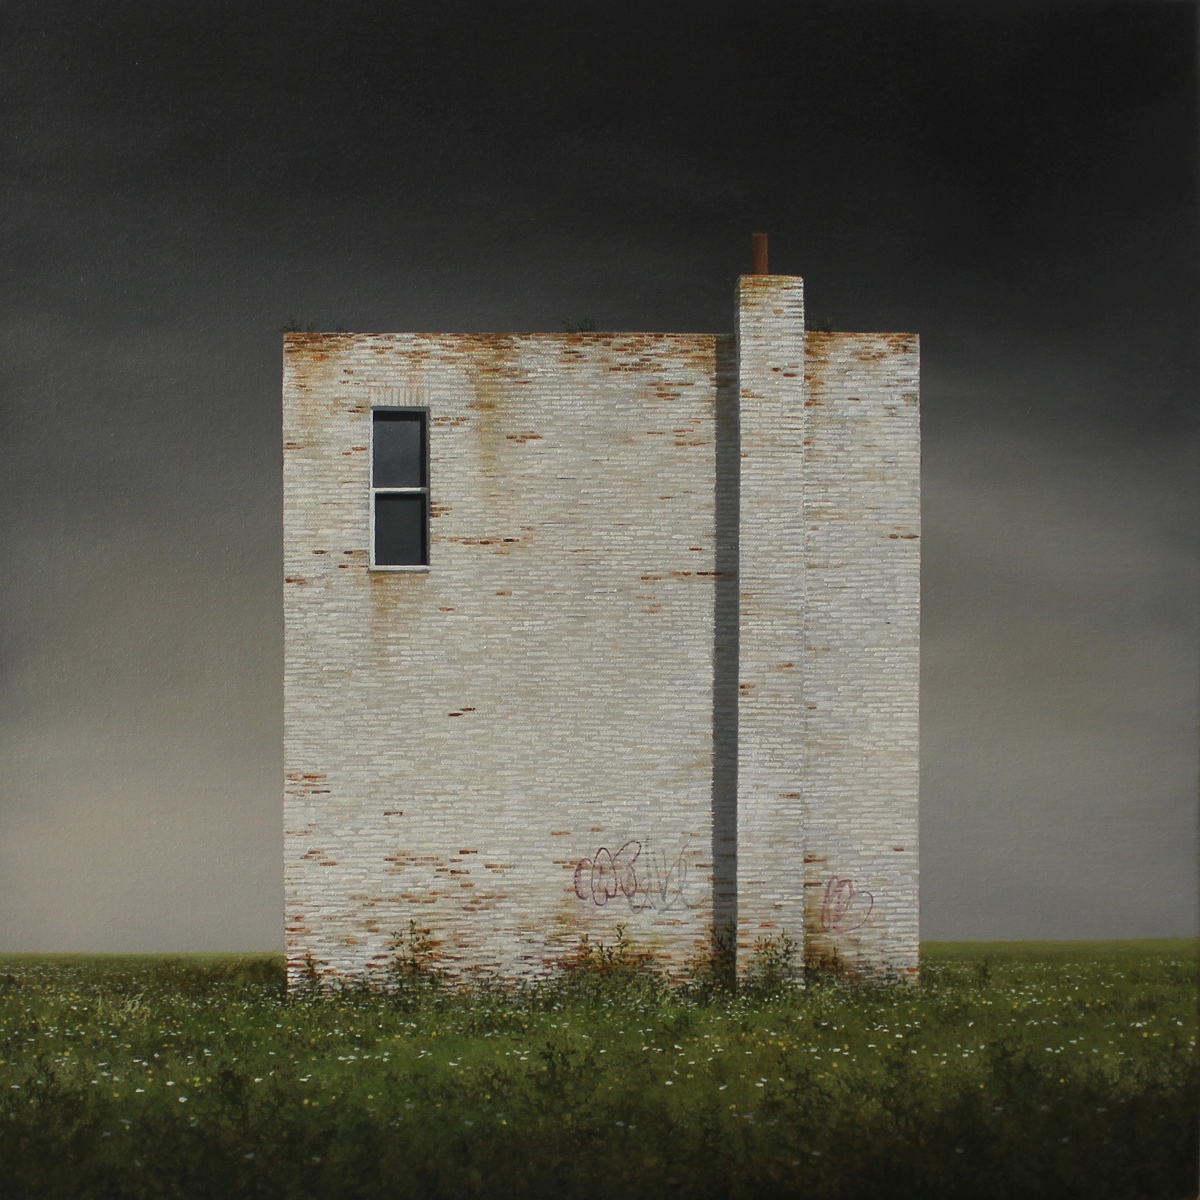 Lee Madgwick – The Nowhere Sightseeing Tour